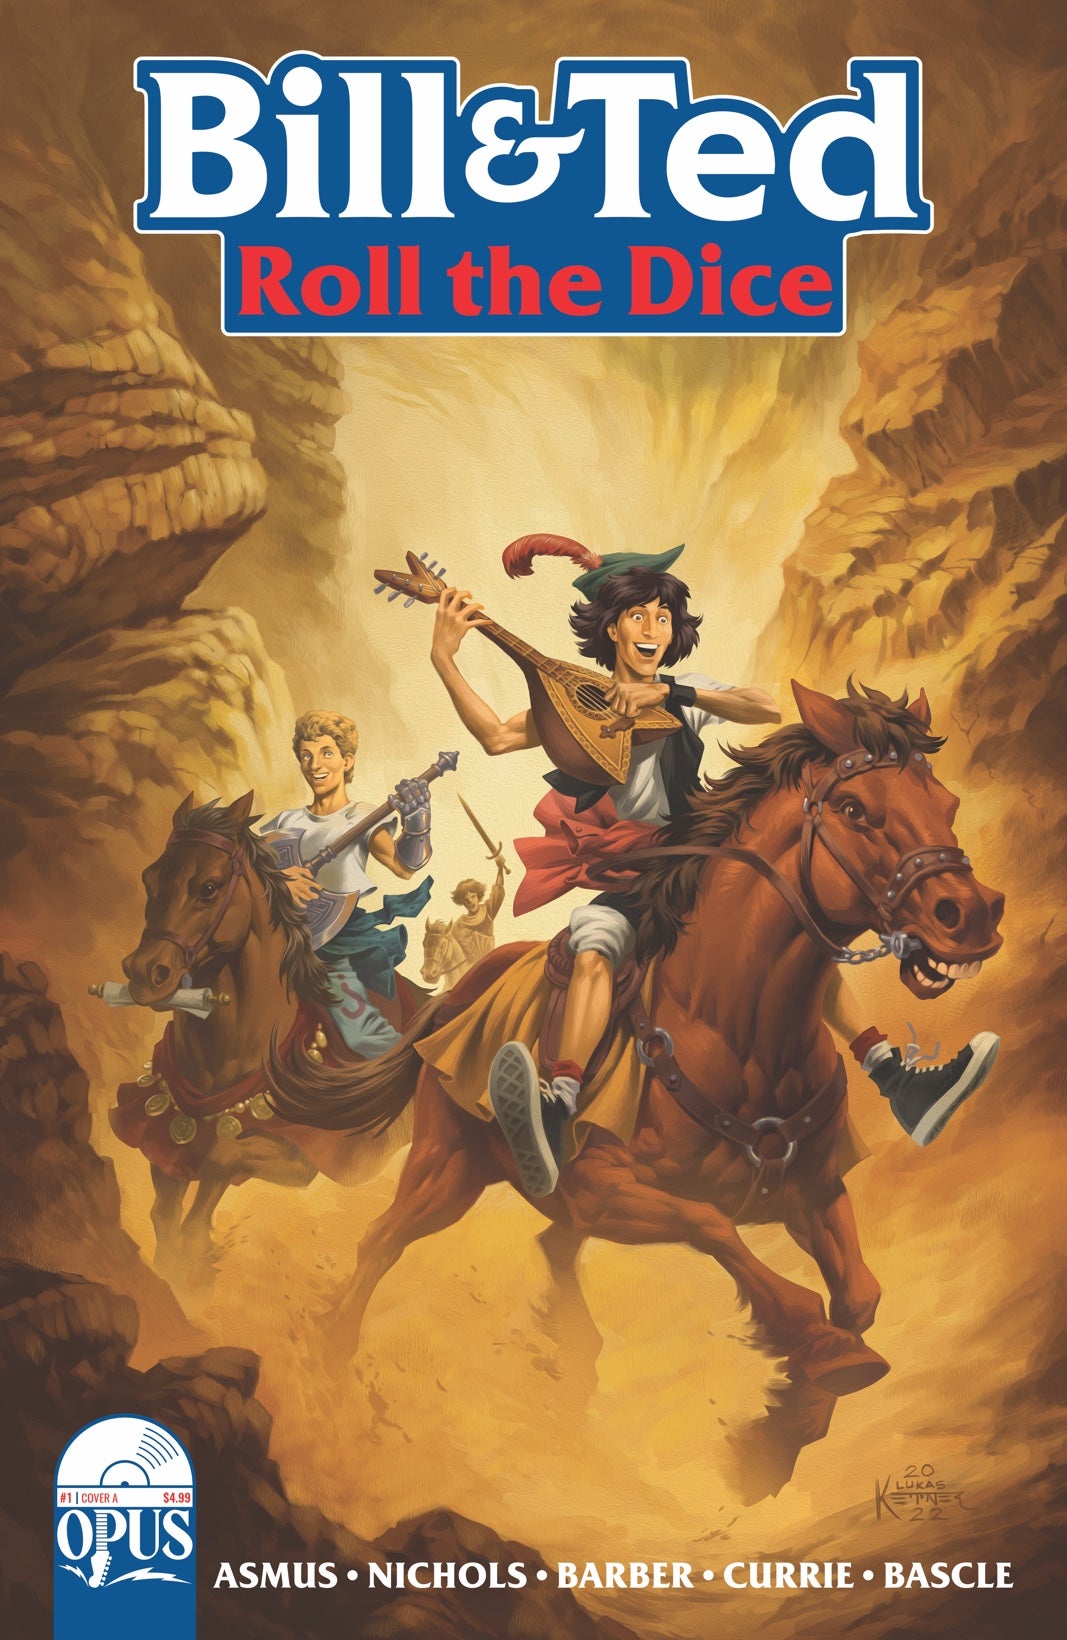 Bill & Ted Roll the Dice #1 by Lukas Ketner  (Image: Opus Publishing)